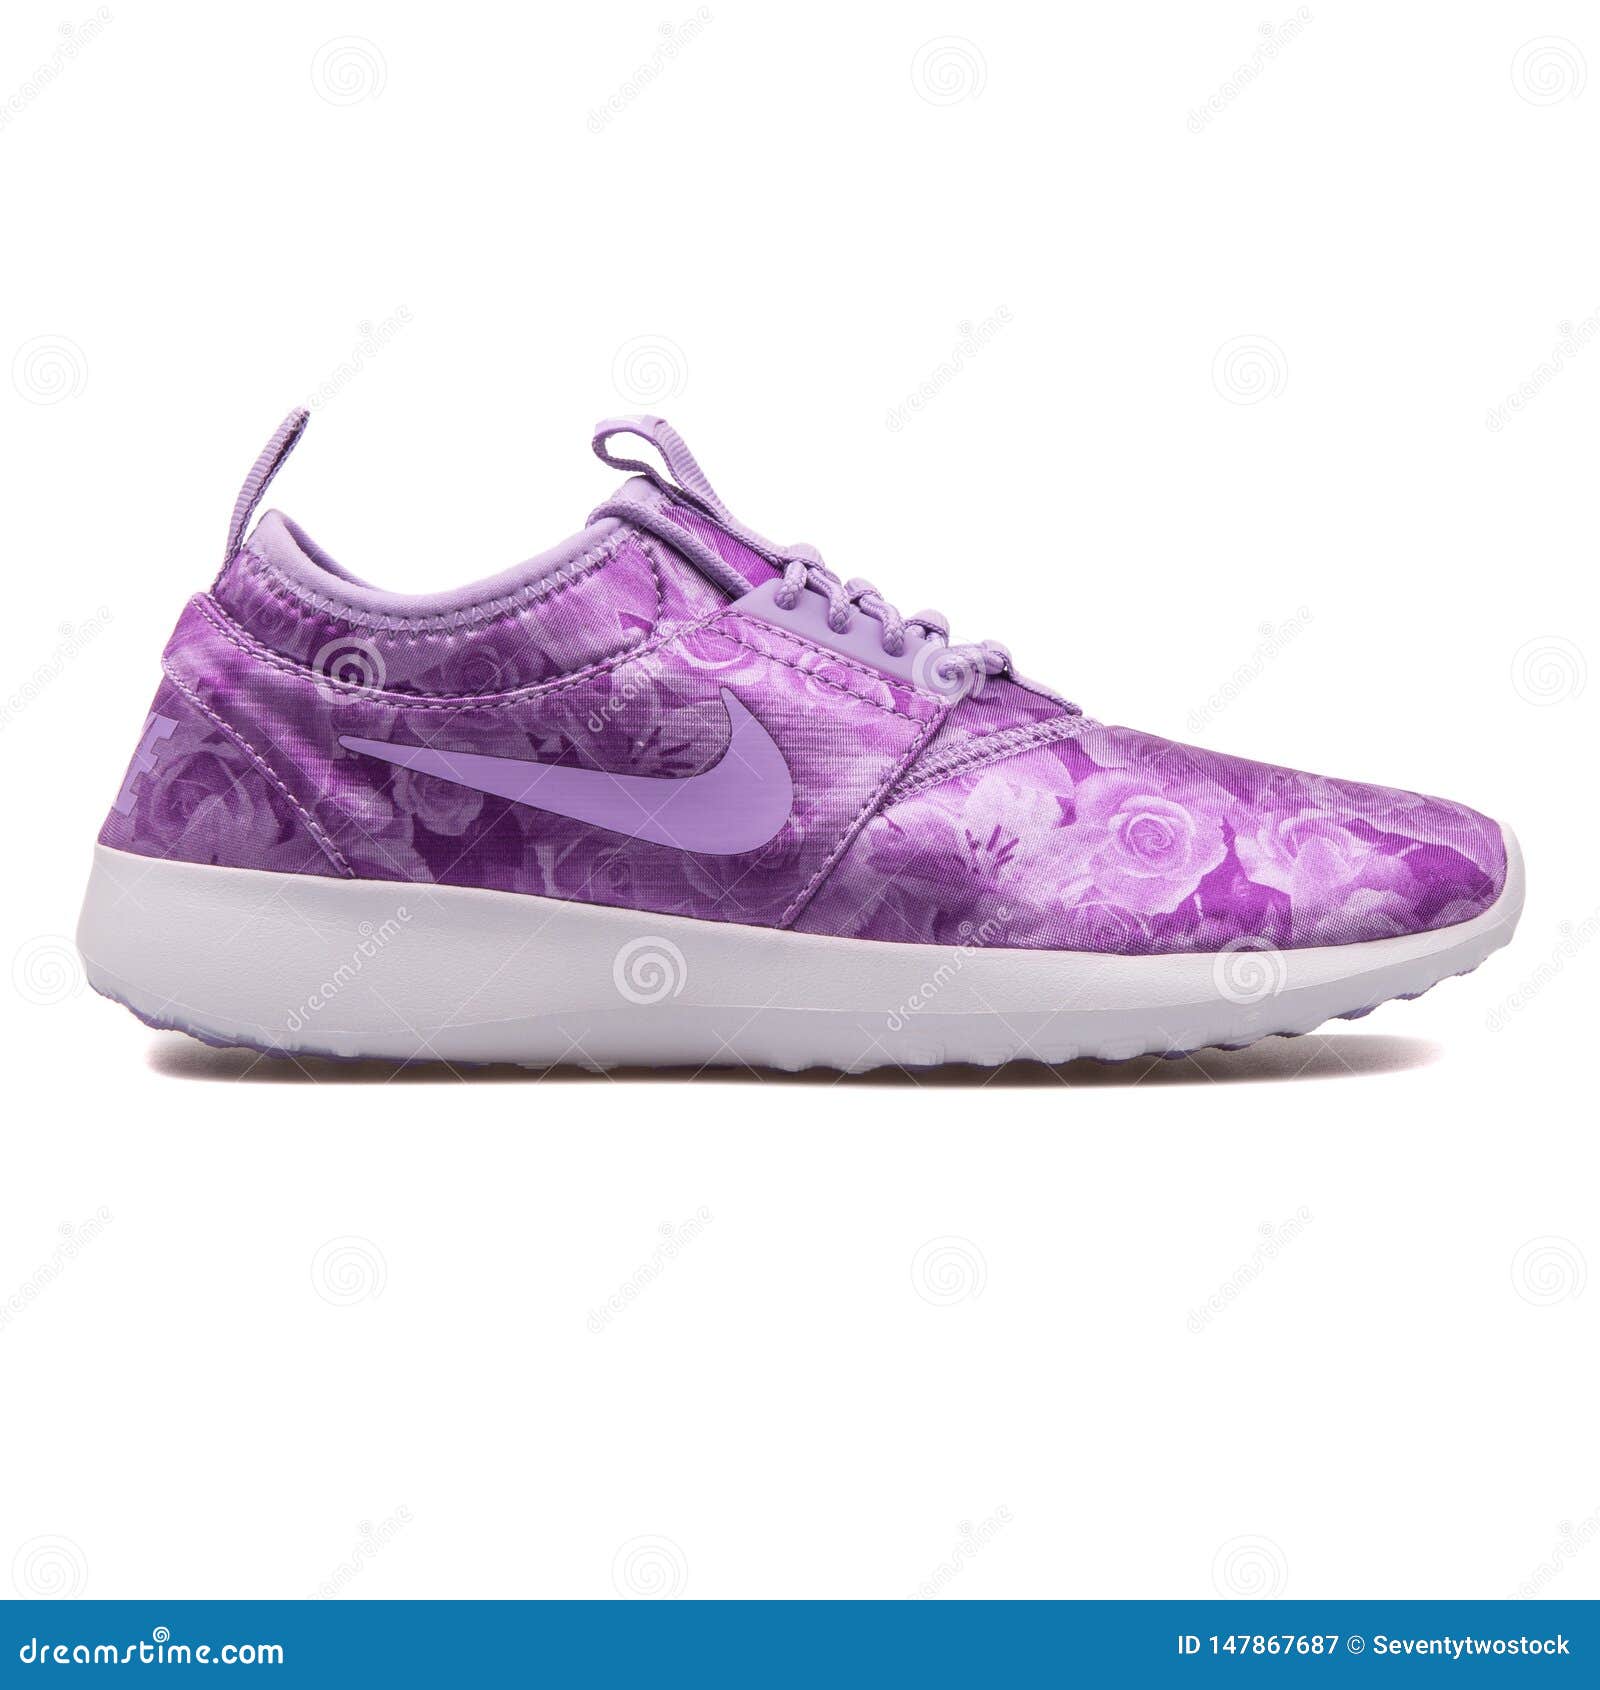 Donau robot gevangenis Nike Juvenate Flowers Print Lilac and White Sneaker Editorial Photography -  Image of shoe, equipment: 147867687